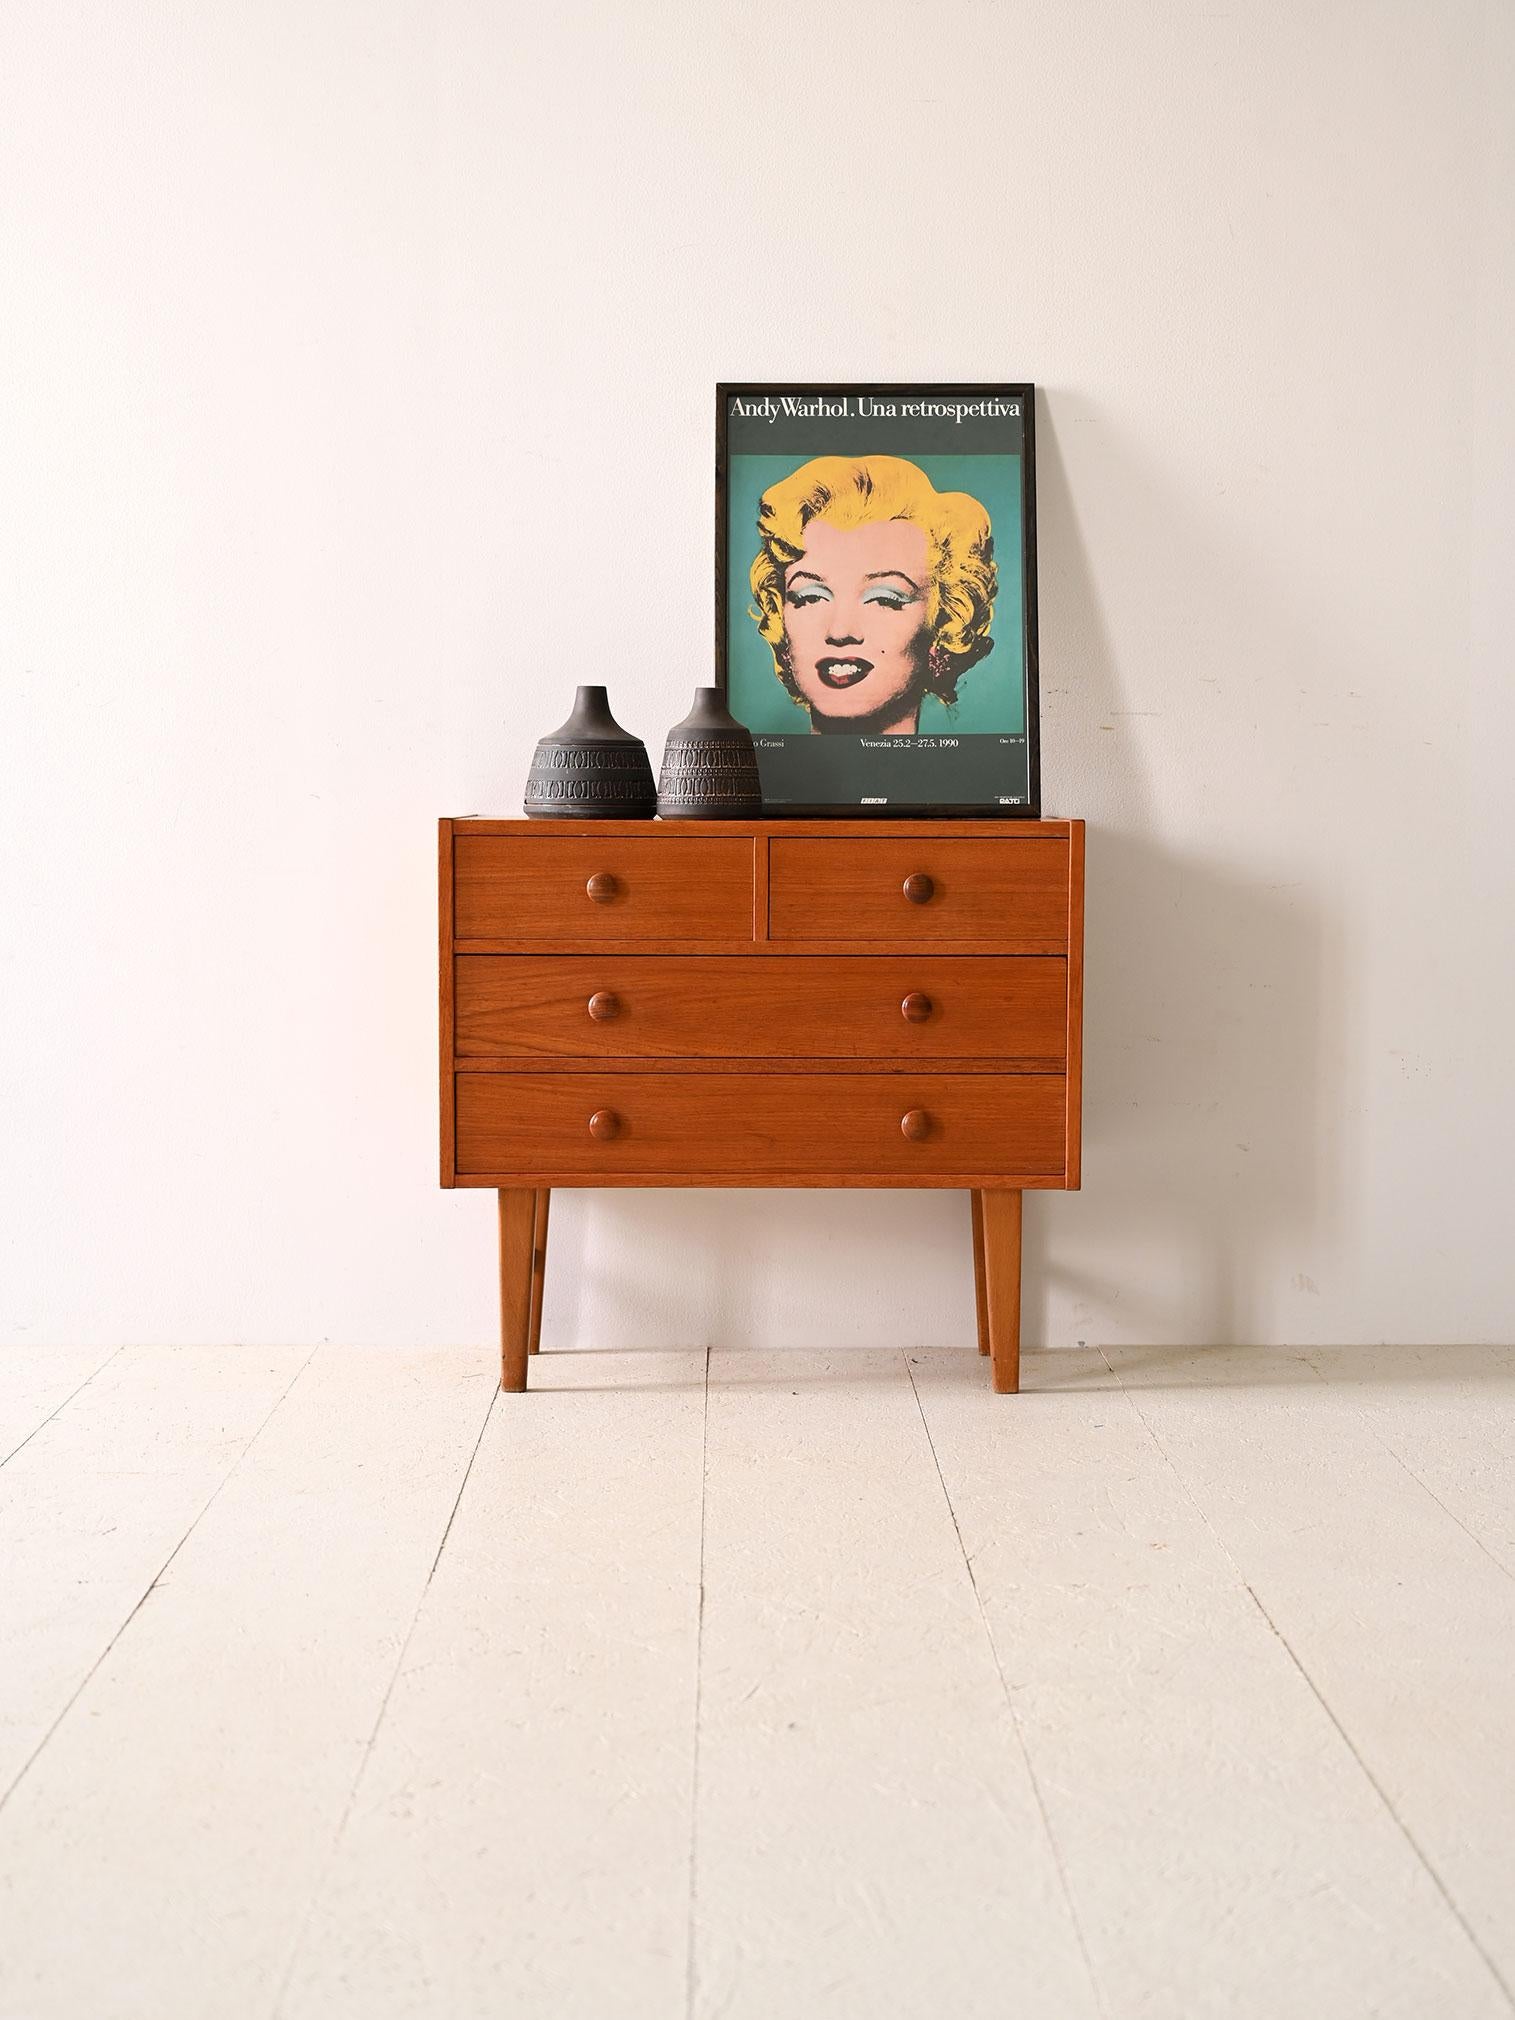 Small Scandinavian teak chest of drawers with 4 drawers.

This original 1960s chest of drawers offers two smaller and two larger drawers, all with rounded carved handles. The clean, minimal lines of Scandinavian design blend seamlessly with the